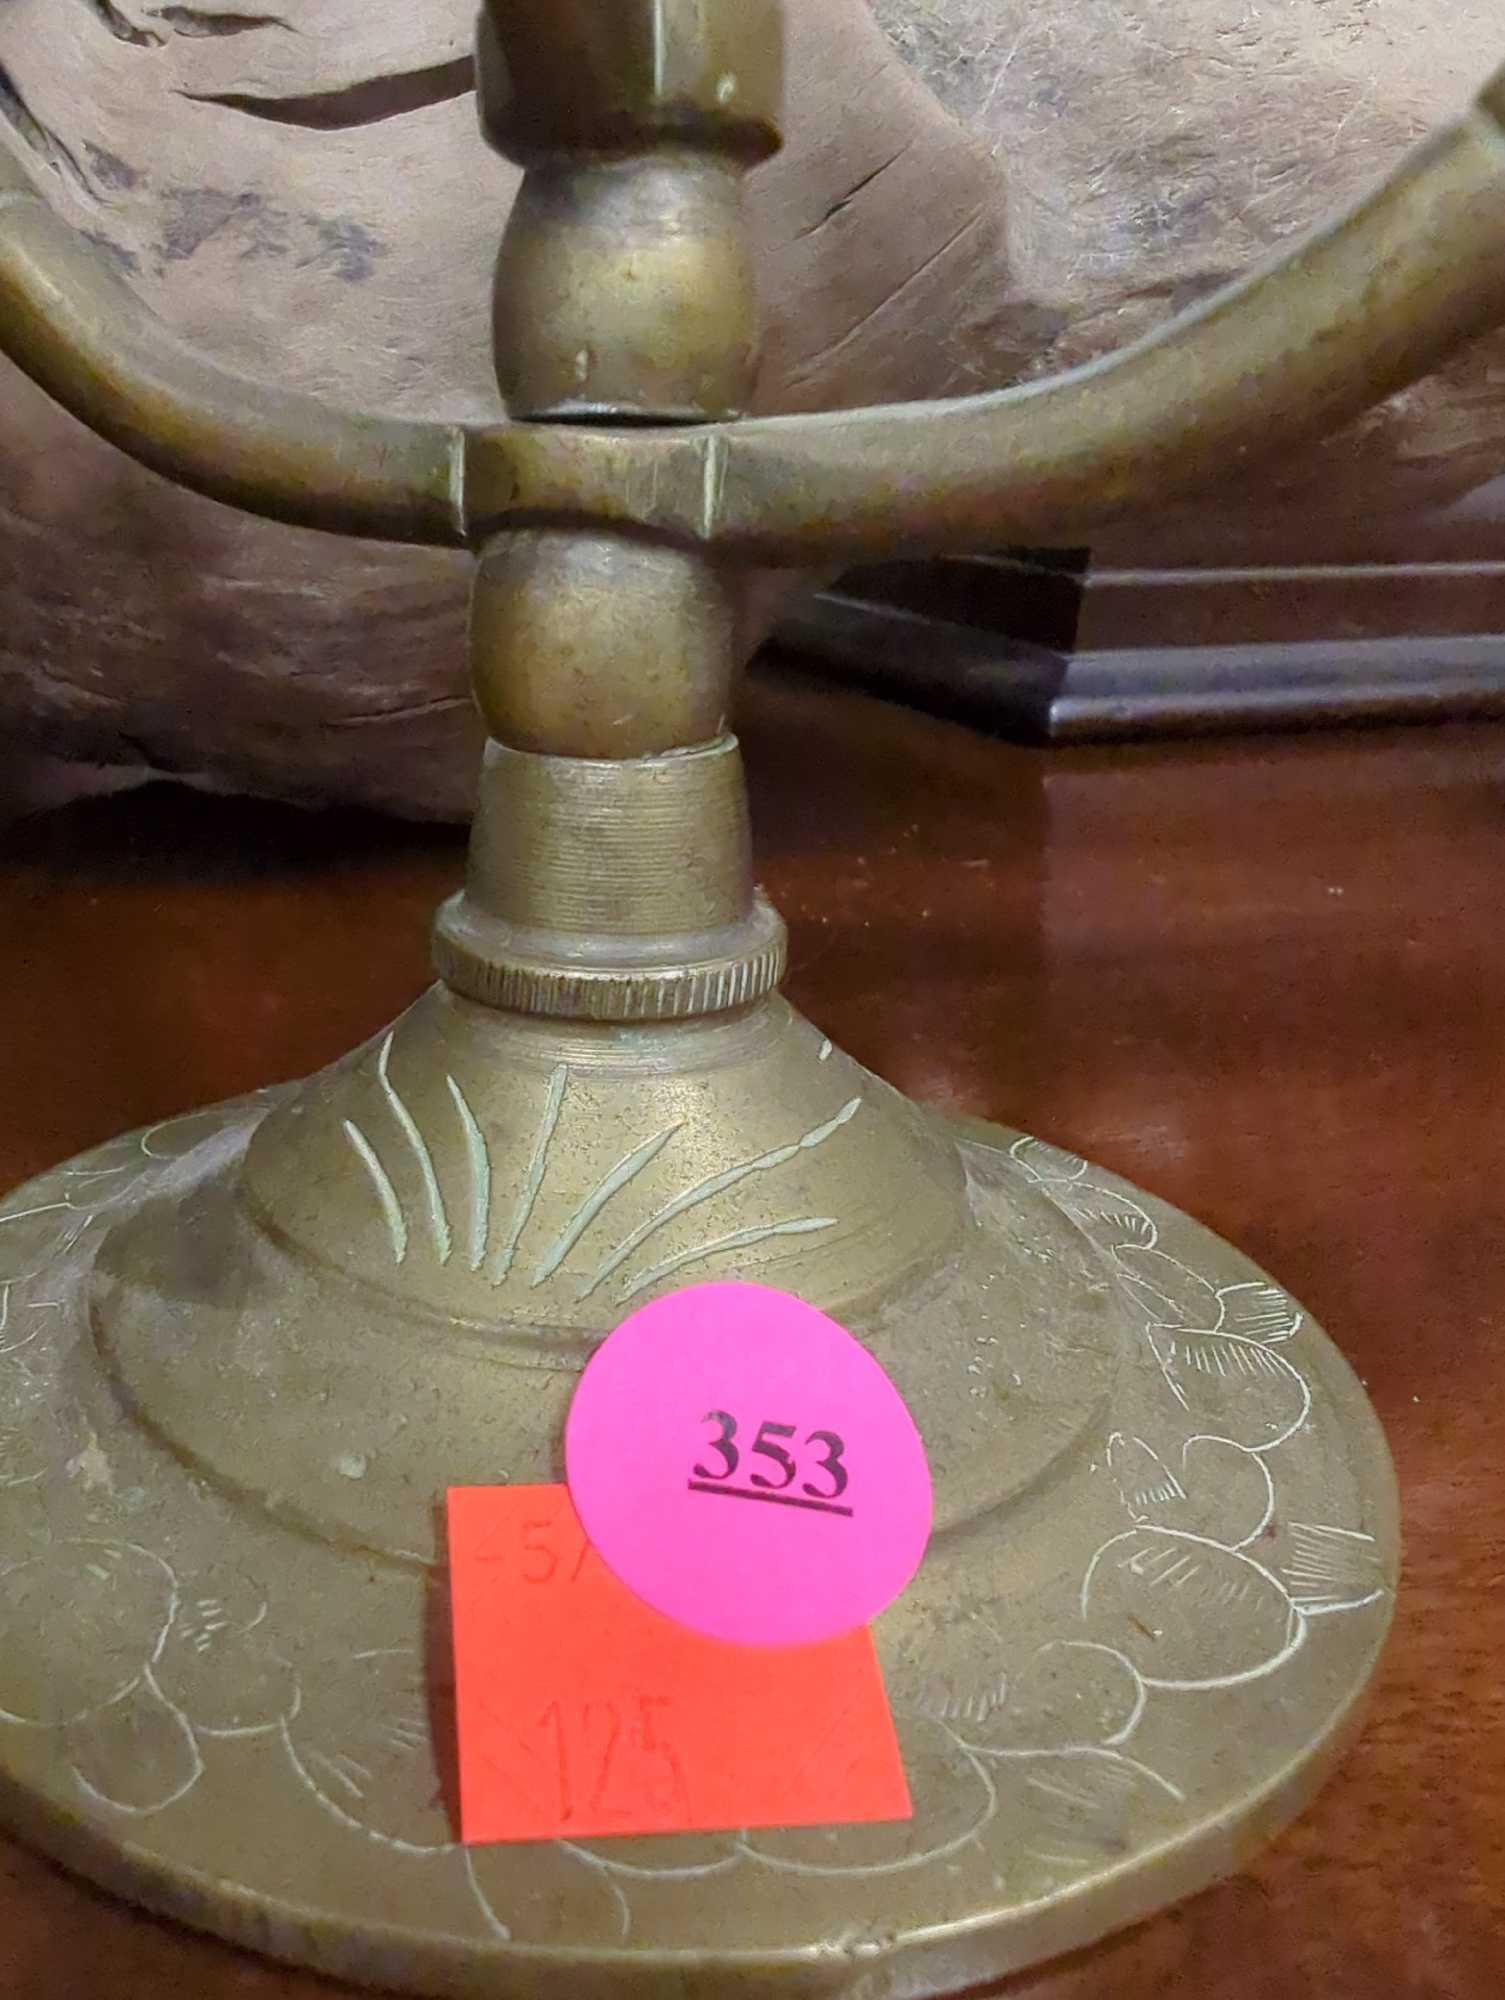 Chinese Brass Candelabra with Plaque, In Great Condition Retail Price Value $60, What you see in